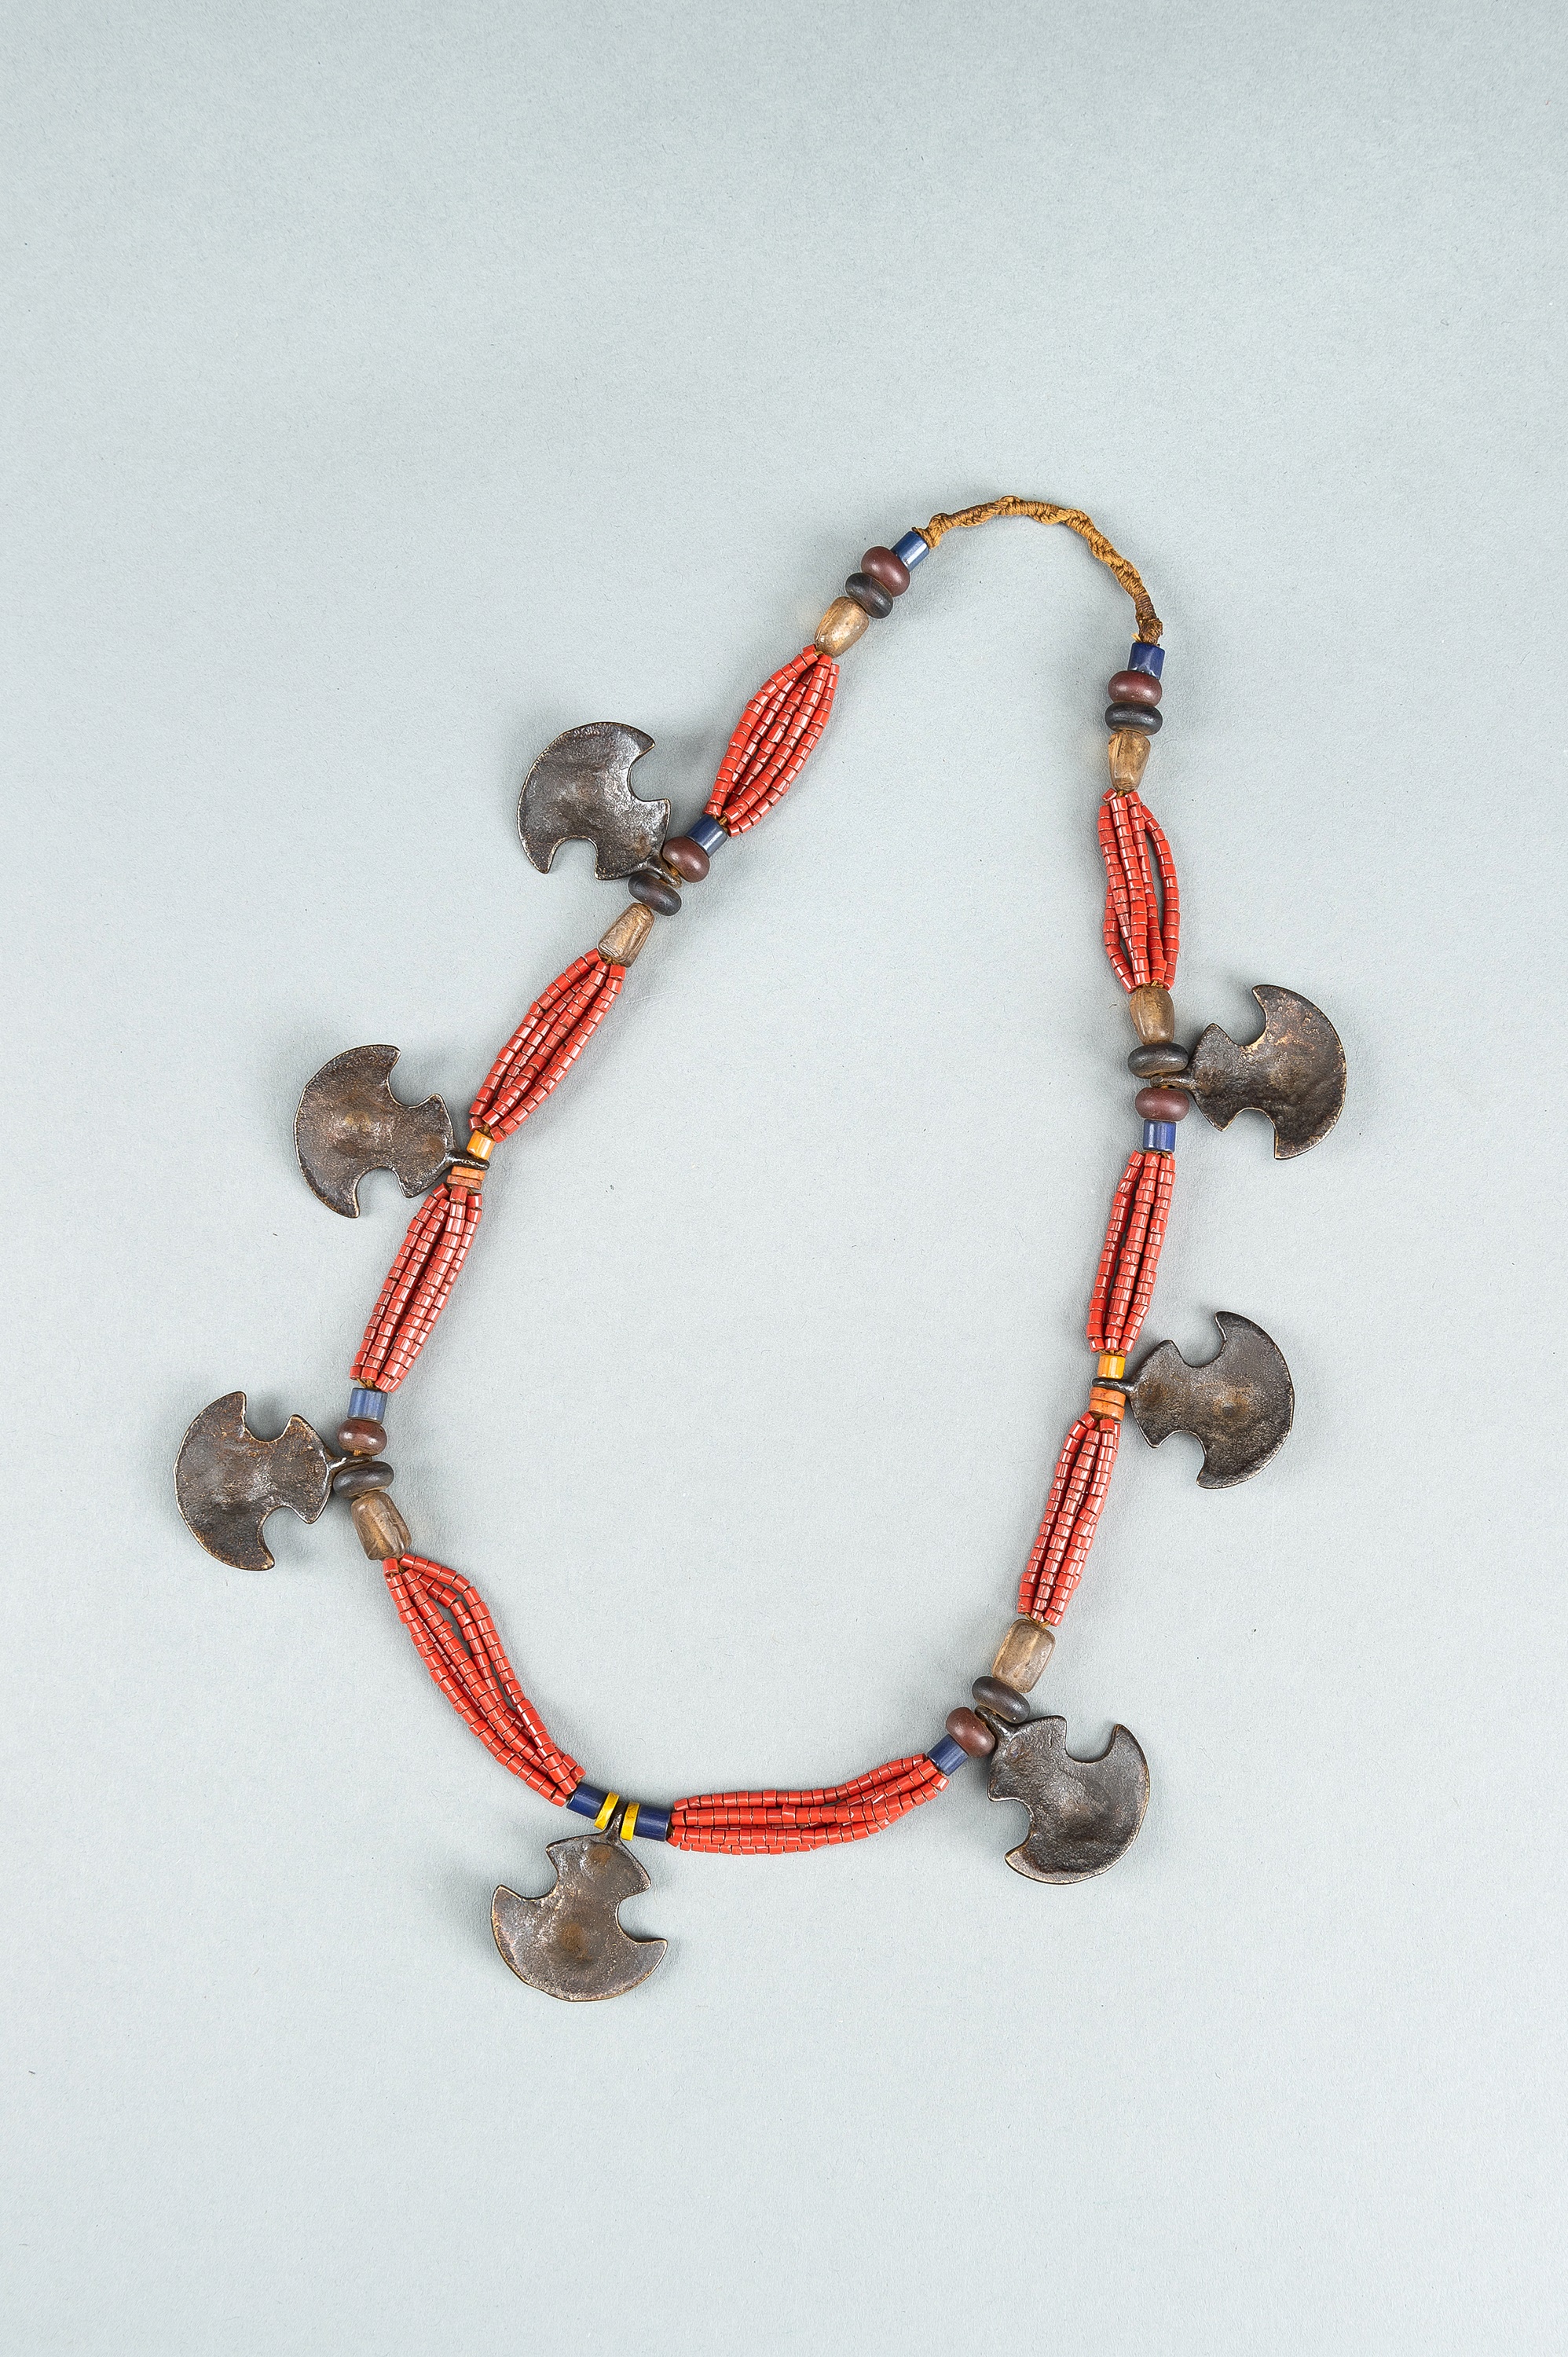 A NAGALAND MULTI-COLORED GLASS AND BRASS NECKLACE, c. 1900s - Image 10 of 11